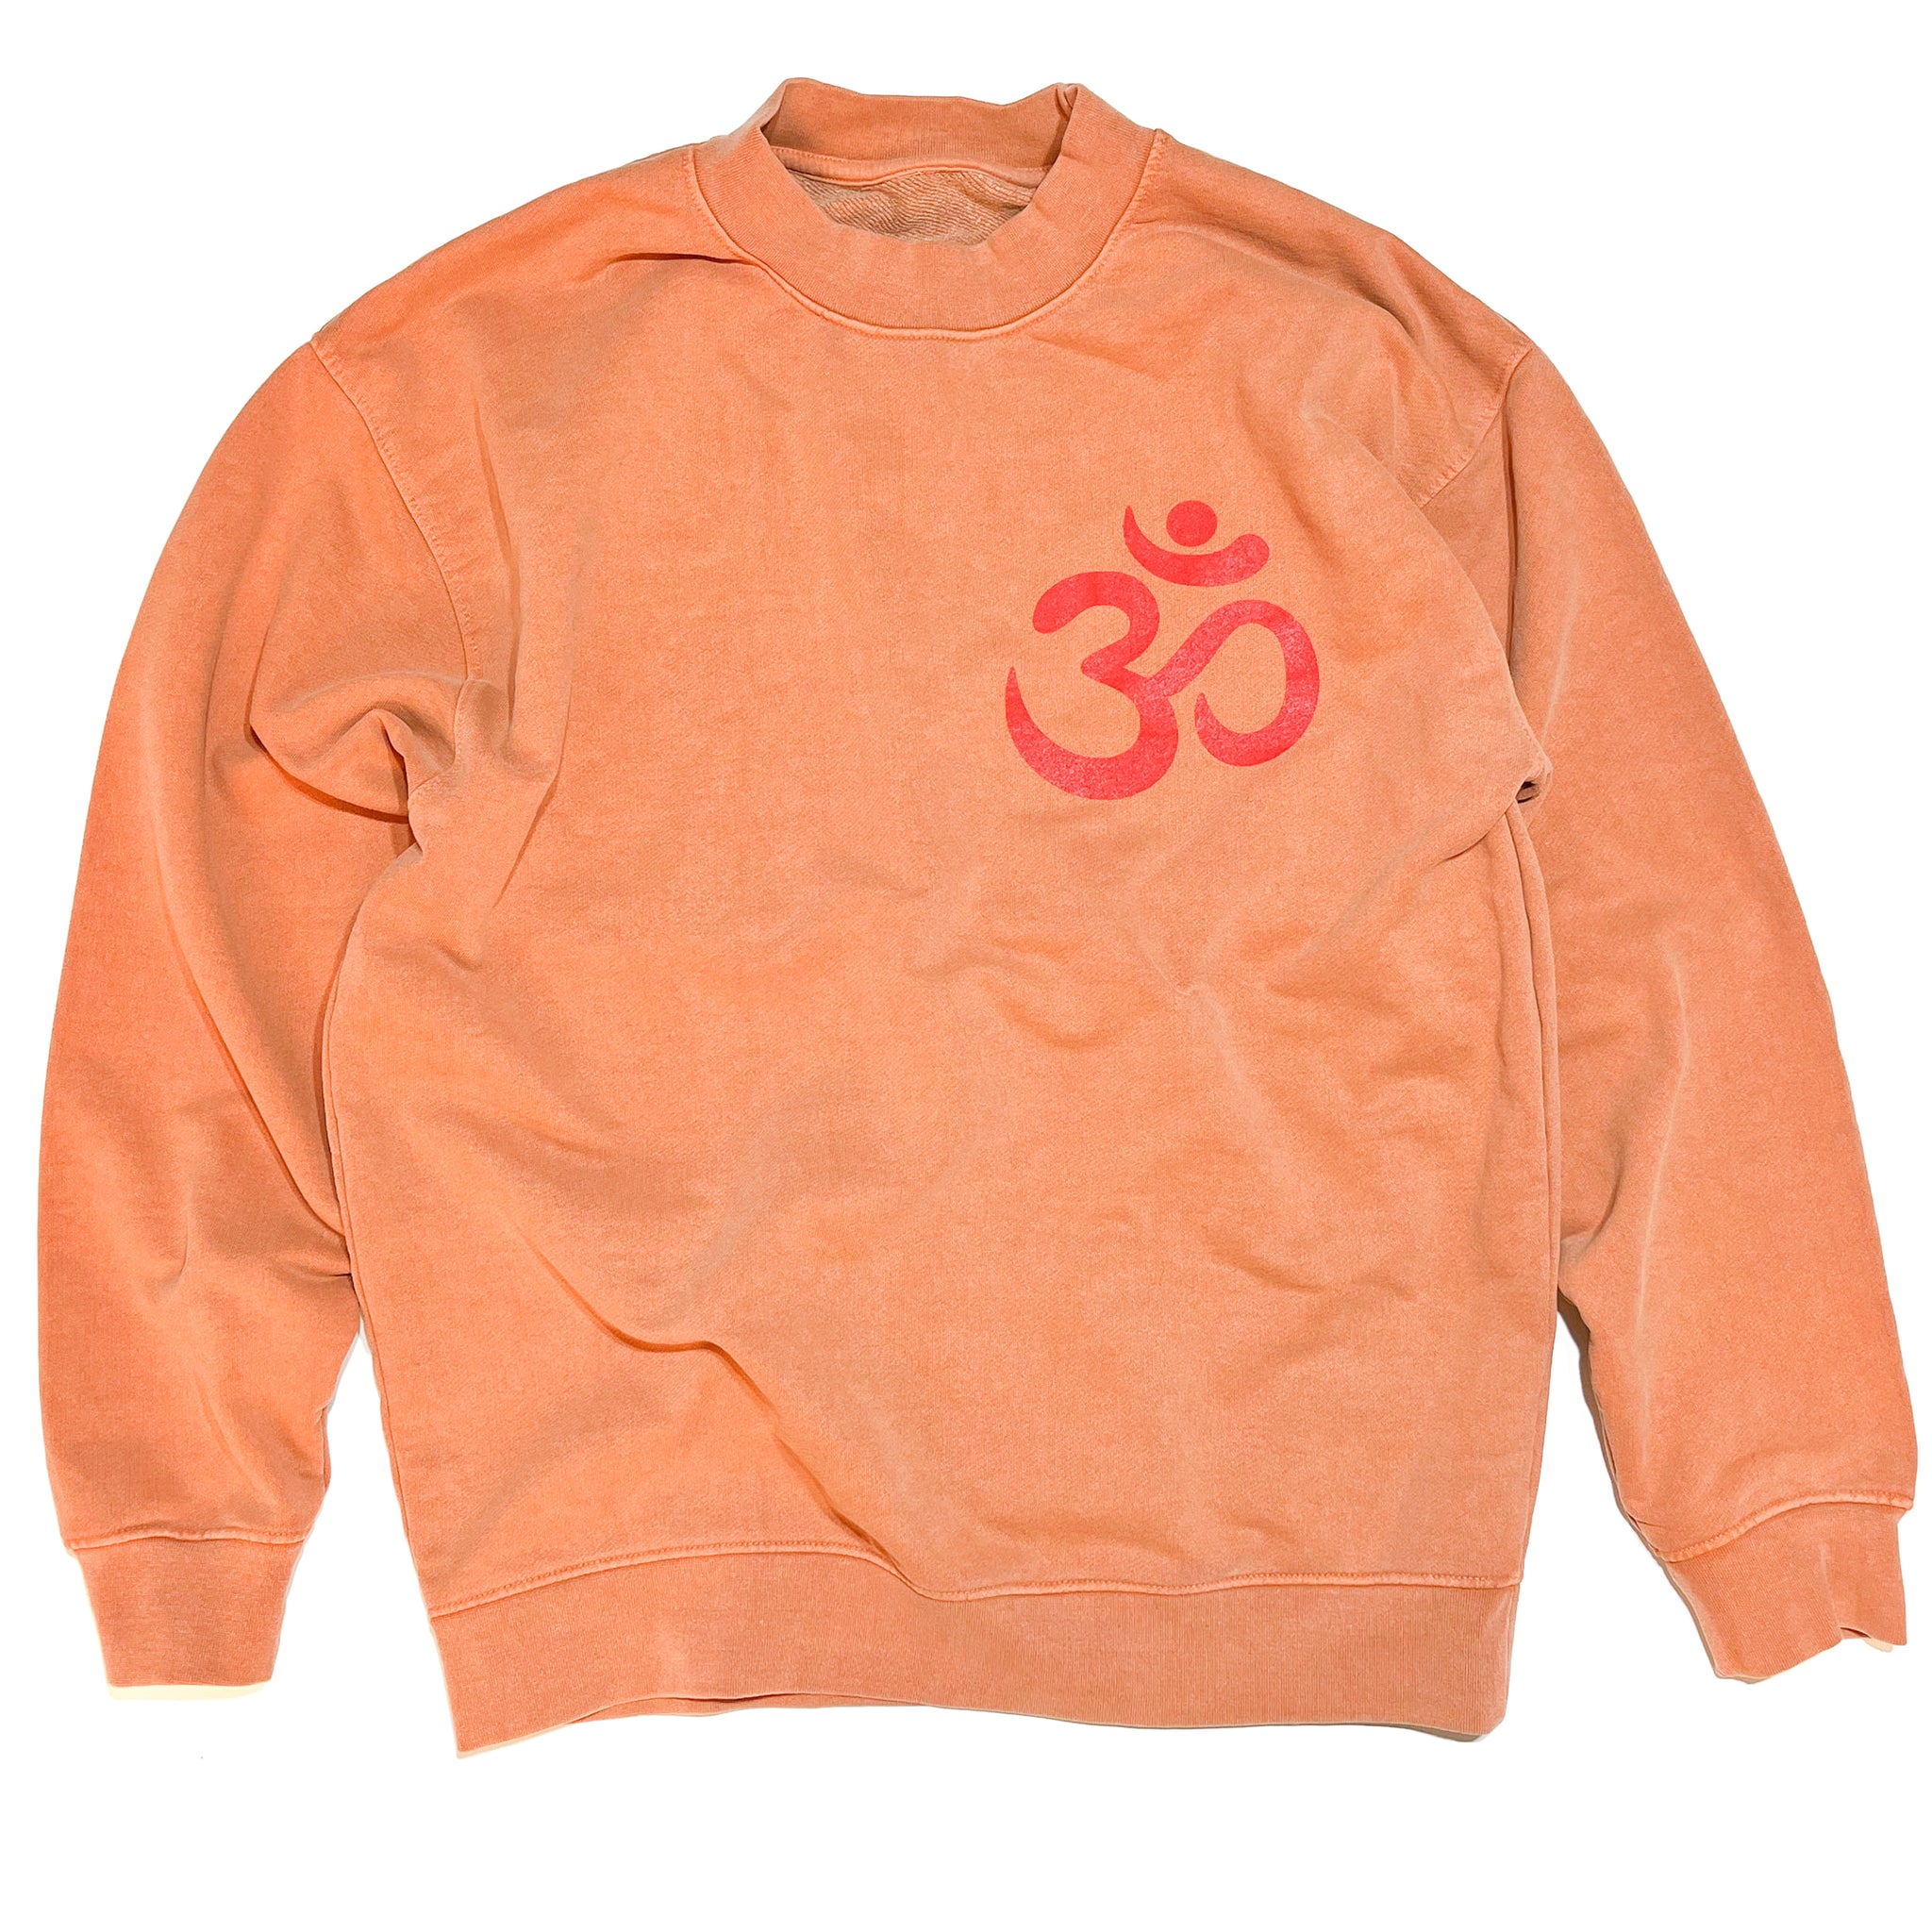 Out Of Ohm Heavy Weight Sweatshirt Marmalade